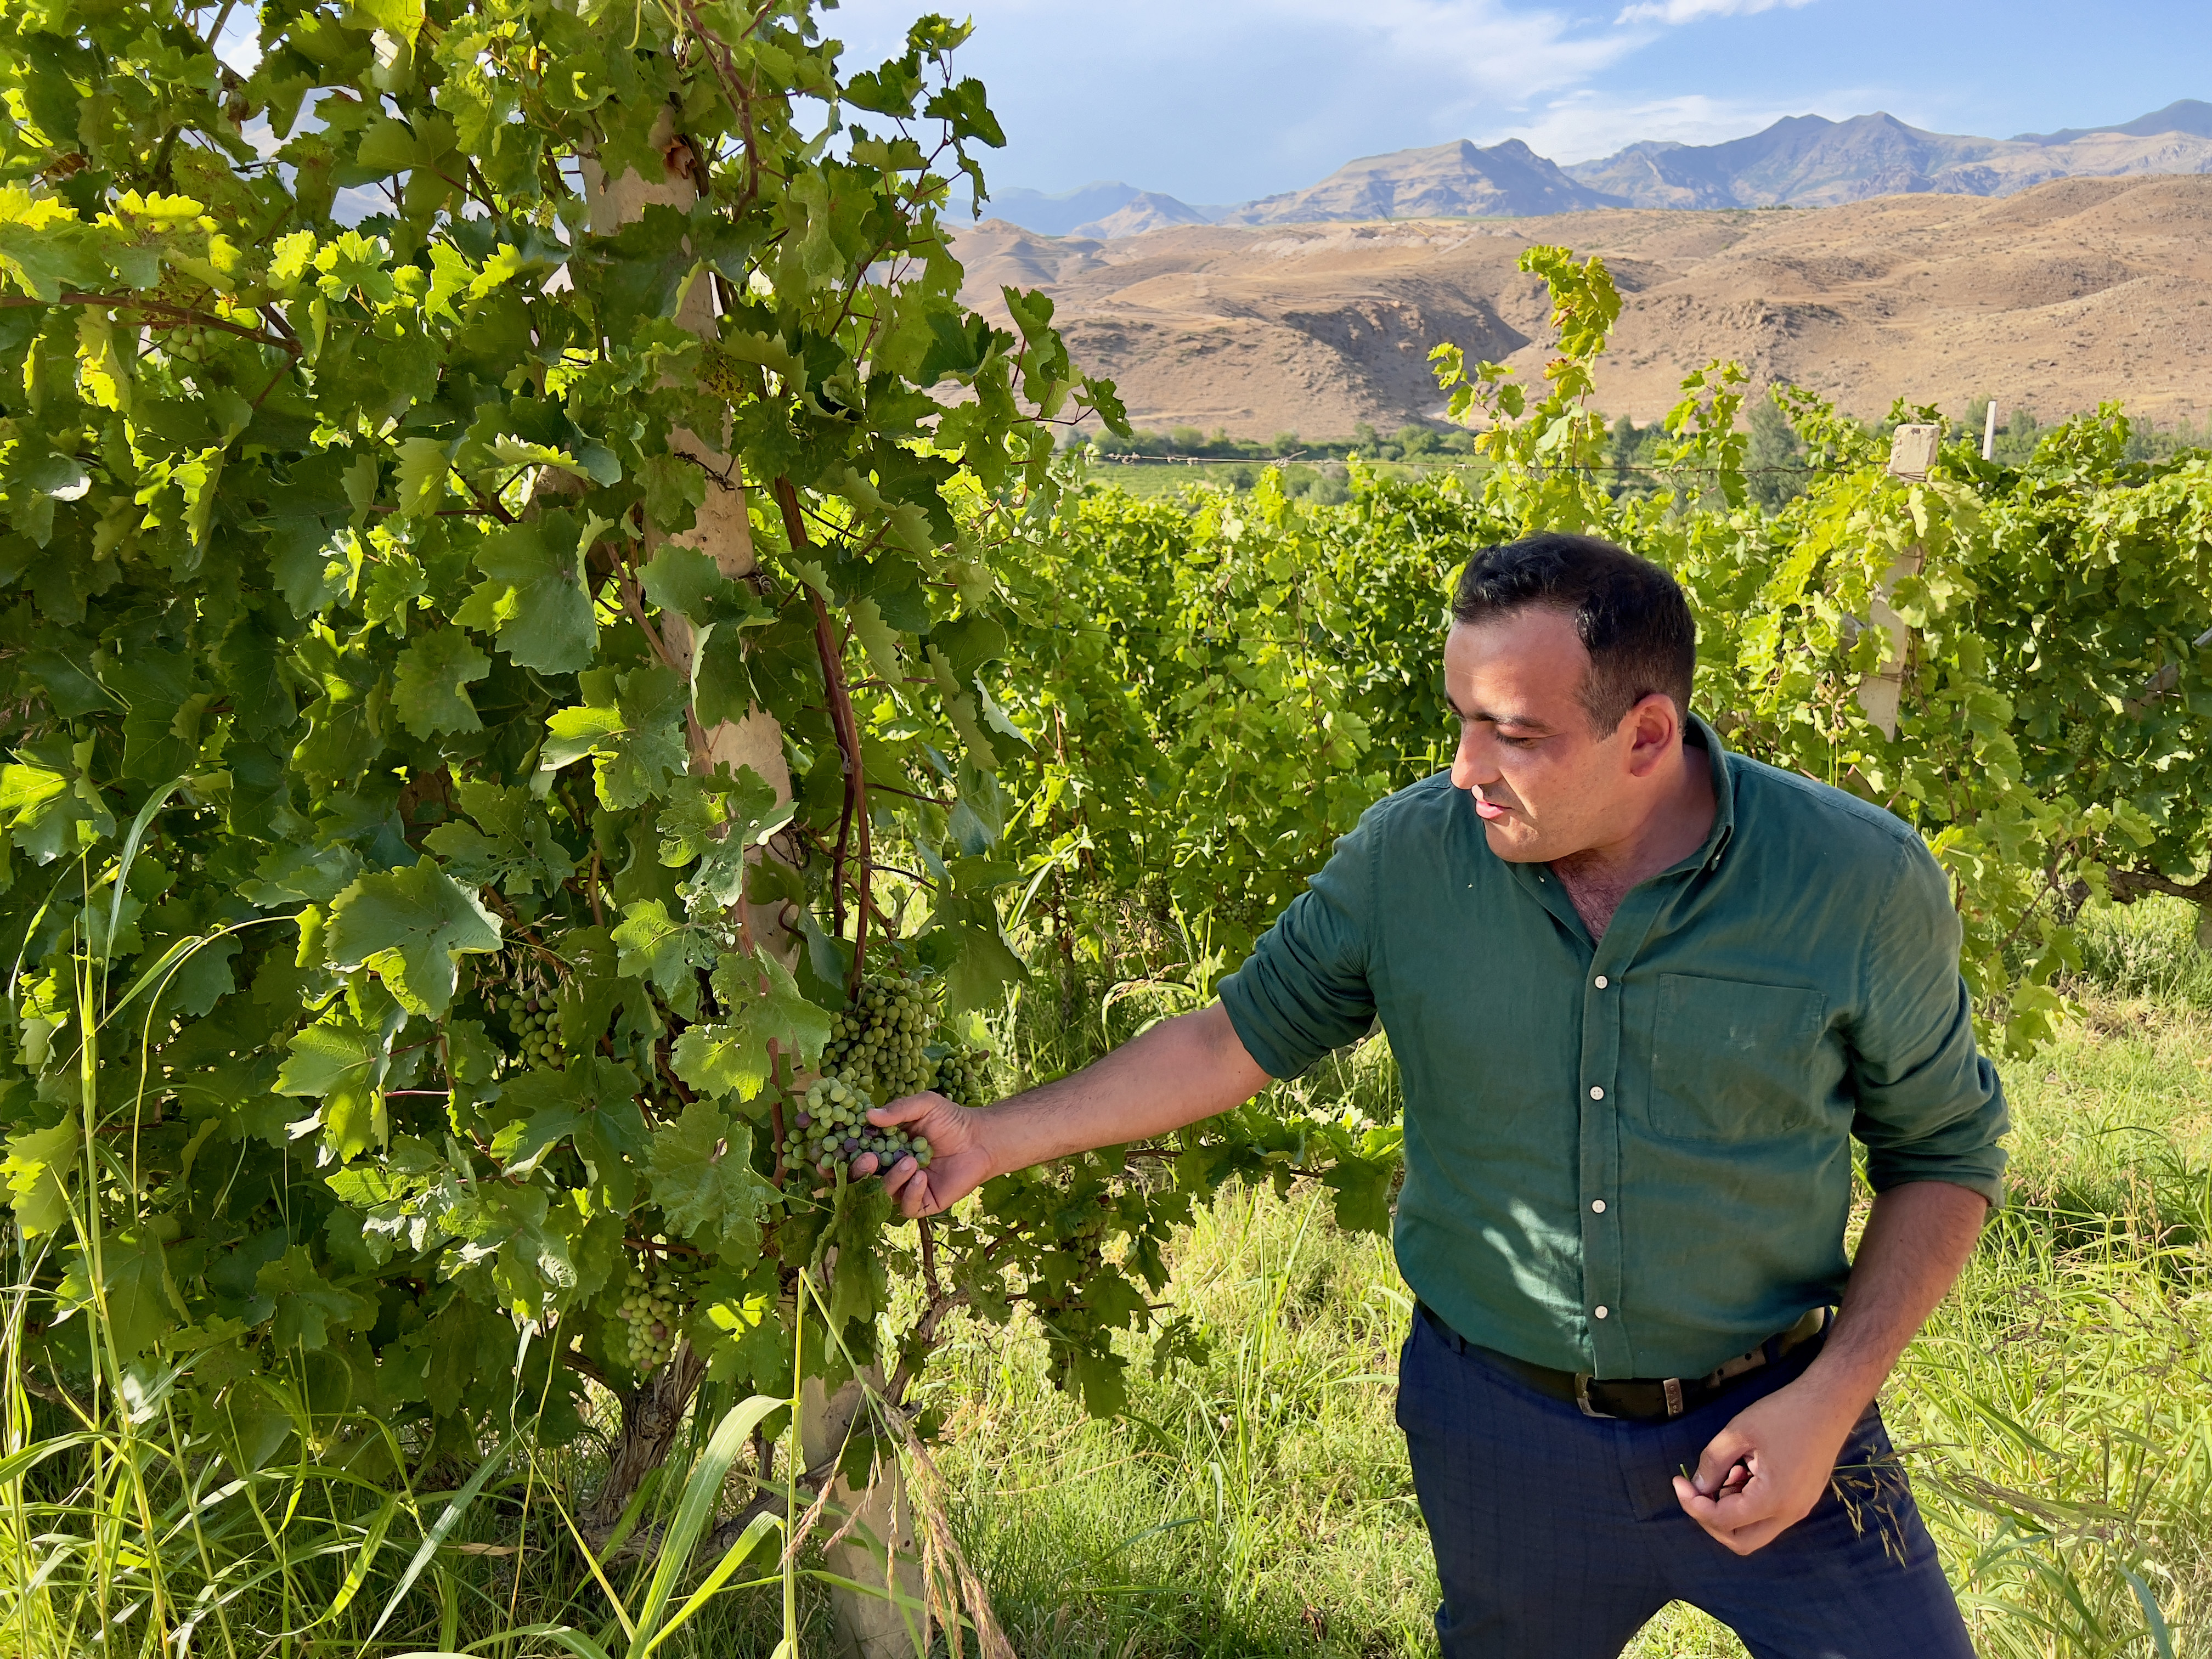 On a hillside in Armenia’s Vayots Dzor province, winemaker Norayr Grigoryan of Areni Vineyards, the country’s first post-Soviet private winemaking company, checks grapes in one of his company’s vineyards. Photo: Peter Neville-Hadley